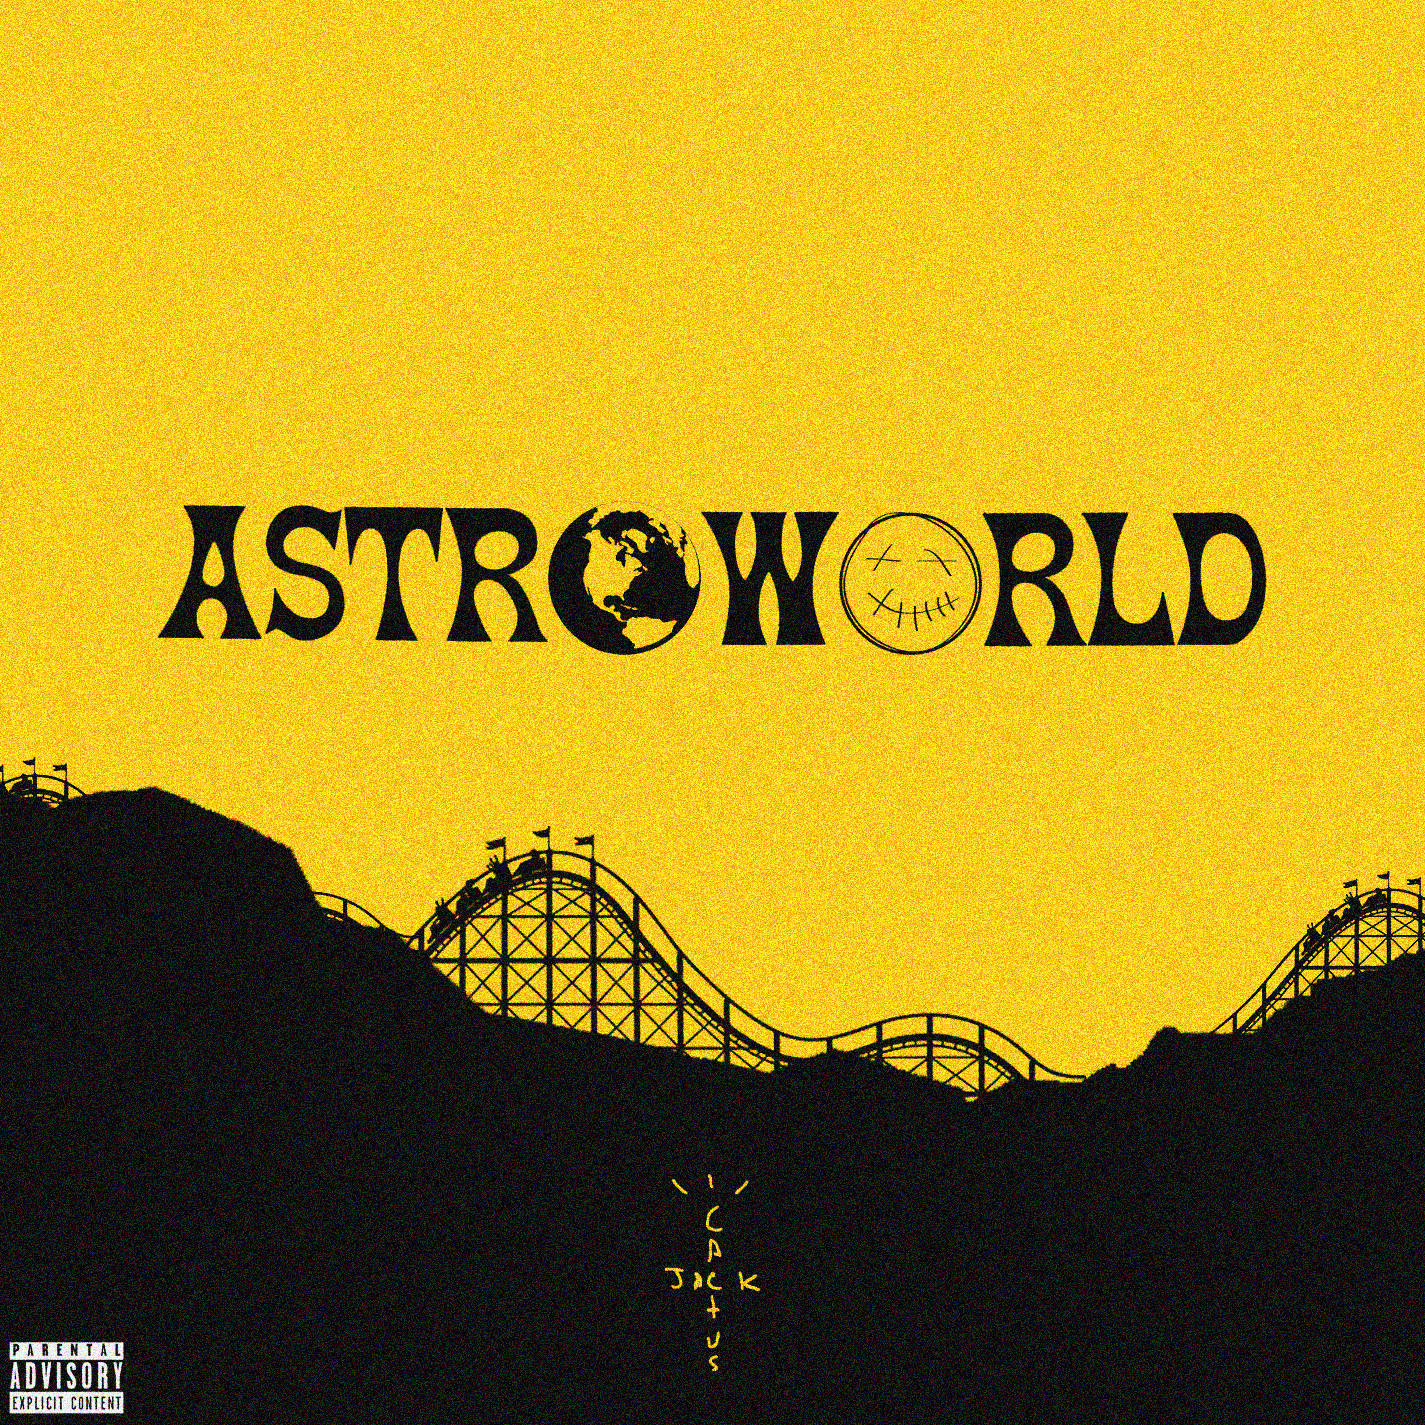 Hd Yellow Aesthetic Astroworld Background